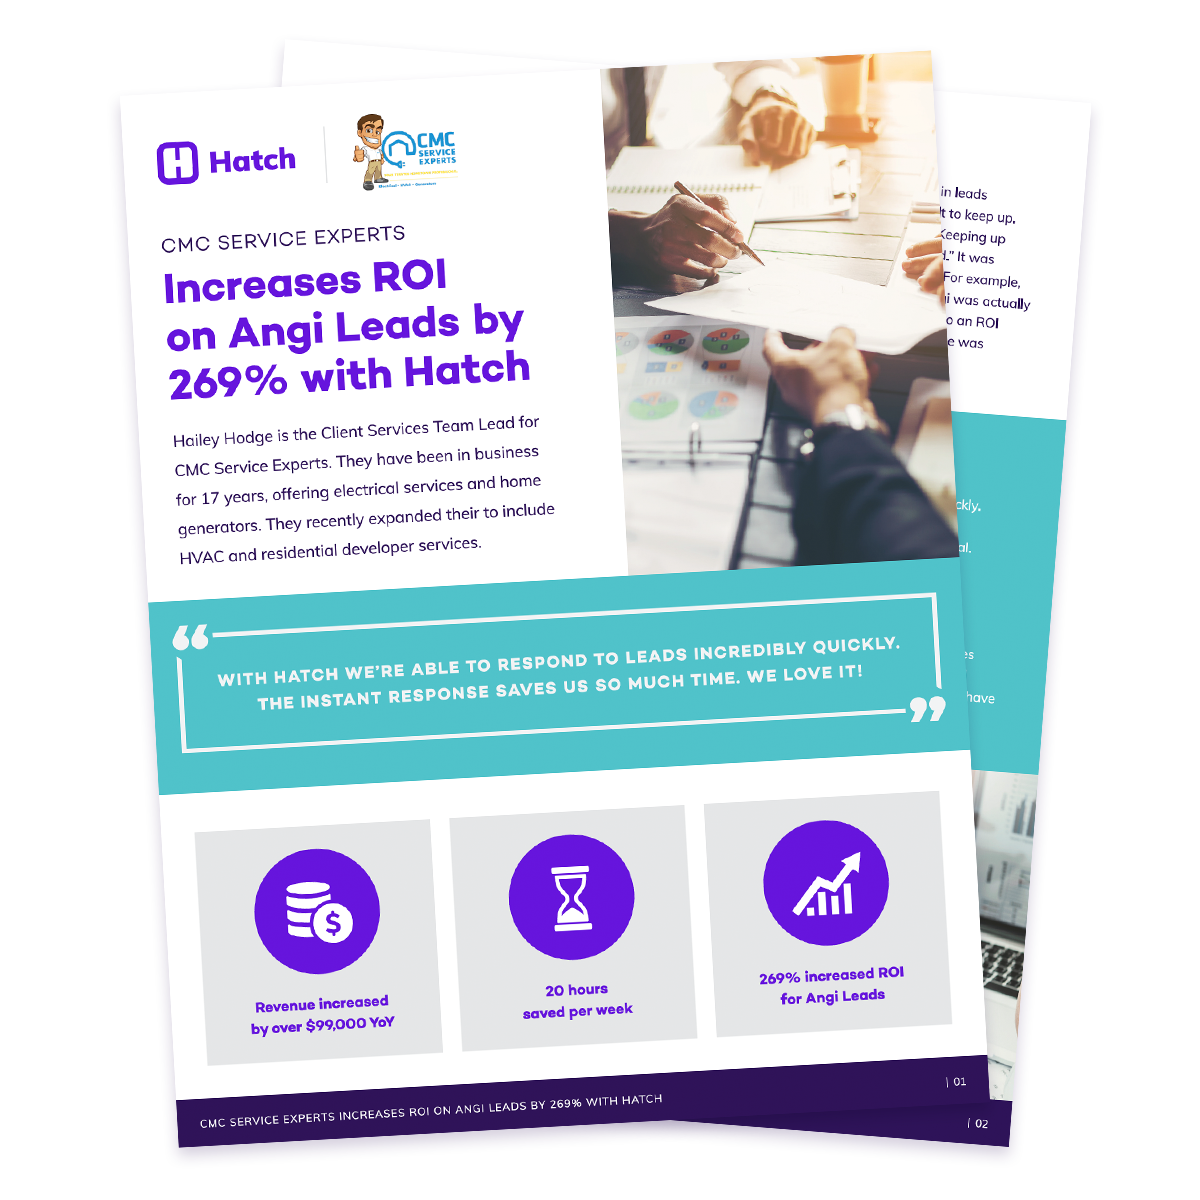 How CMC Service Experts Gained a 269% Increase in ROI